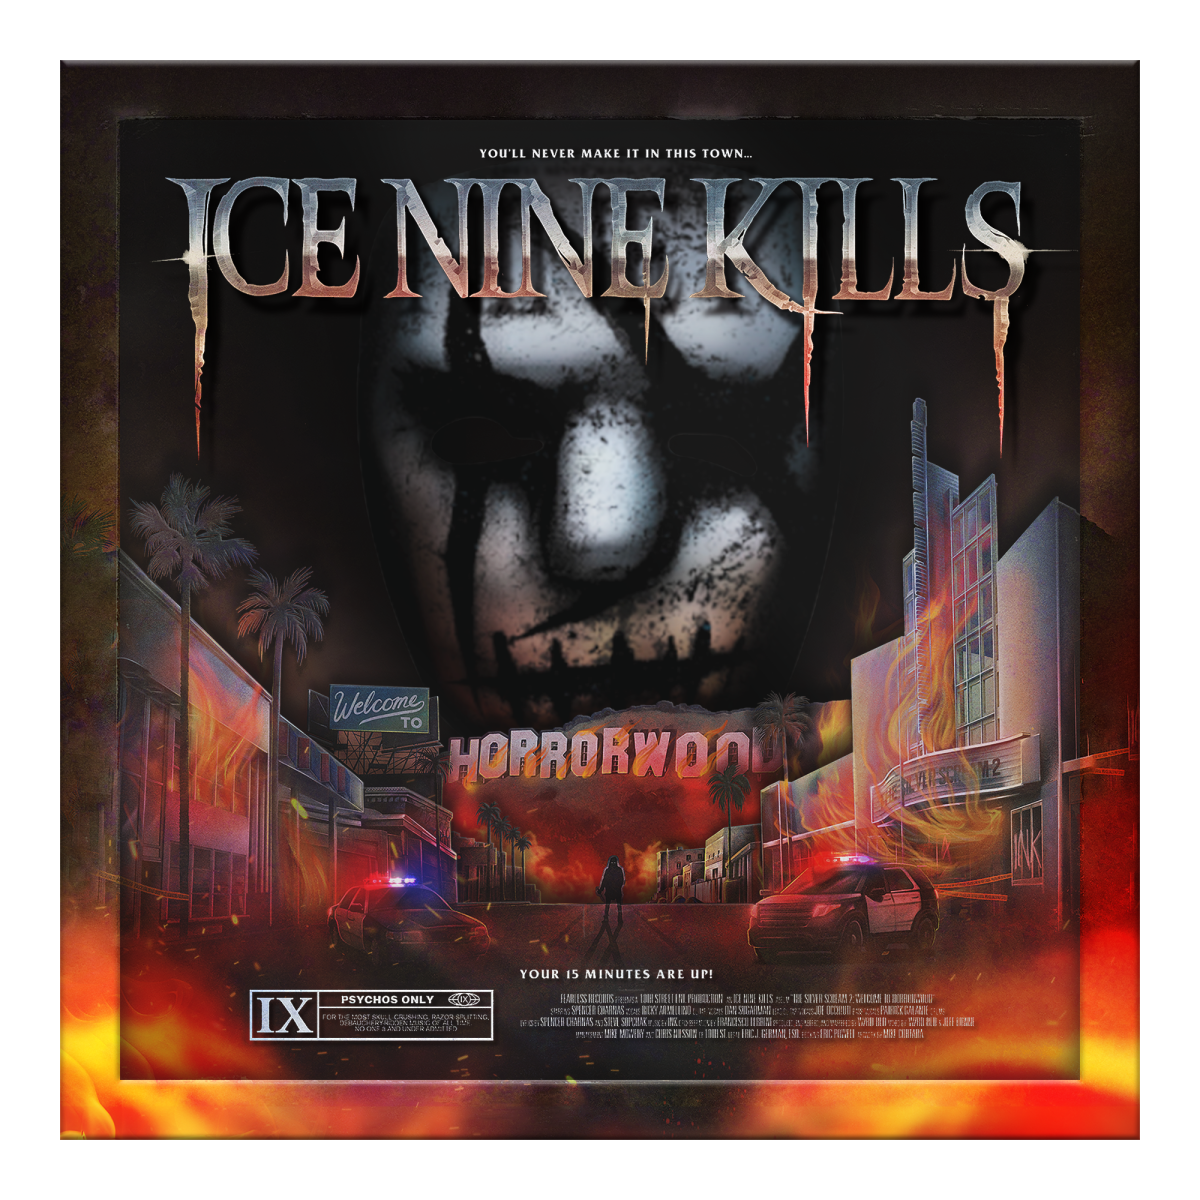 Ice+Nine+Kills+2023+The+Silver+Scream+2%3A+Welcome+to+Horrorwood+Under+Fire+Deluxe+album.+Courtesy%3A+Fearless+Records